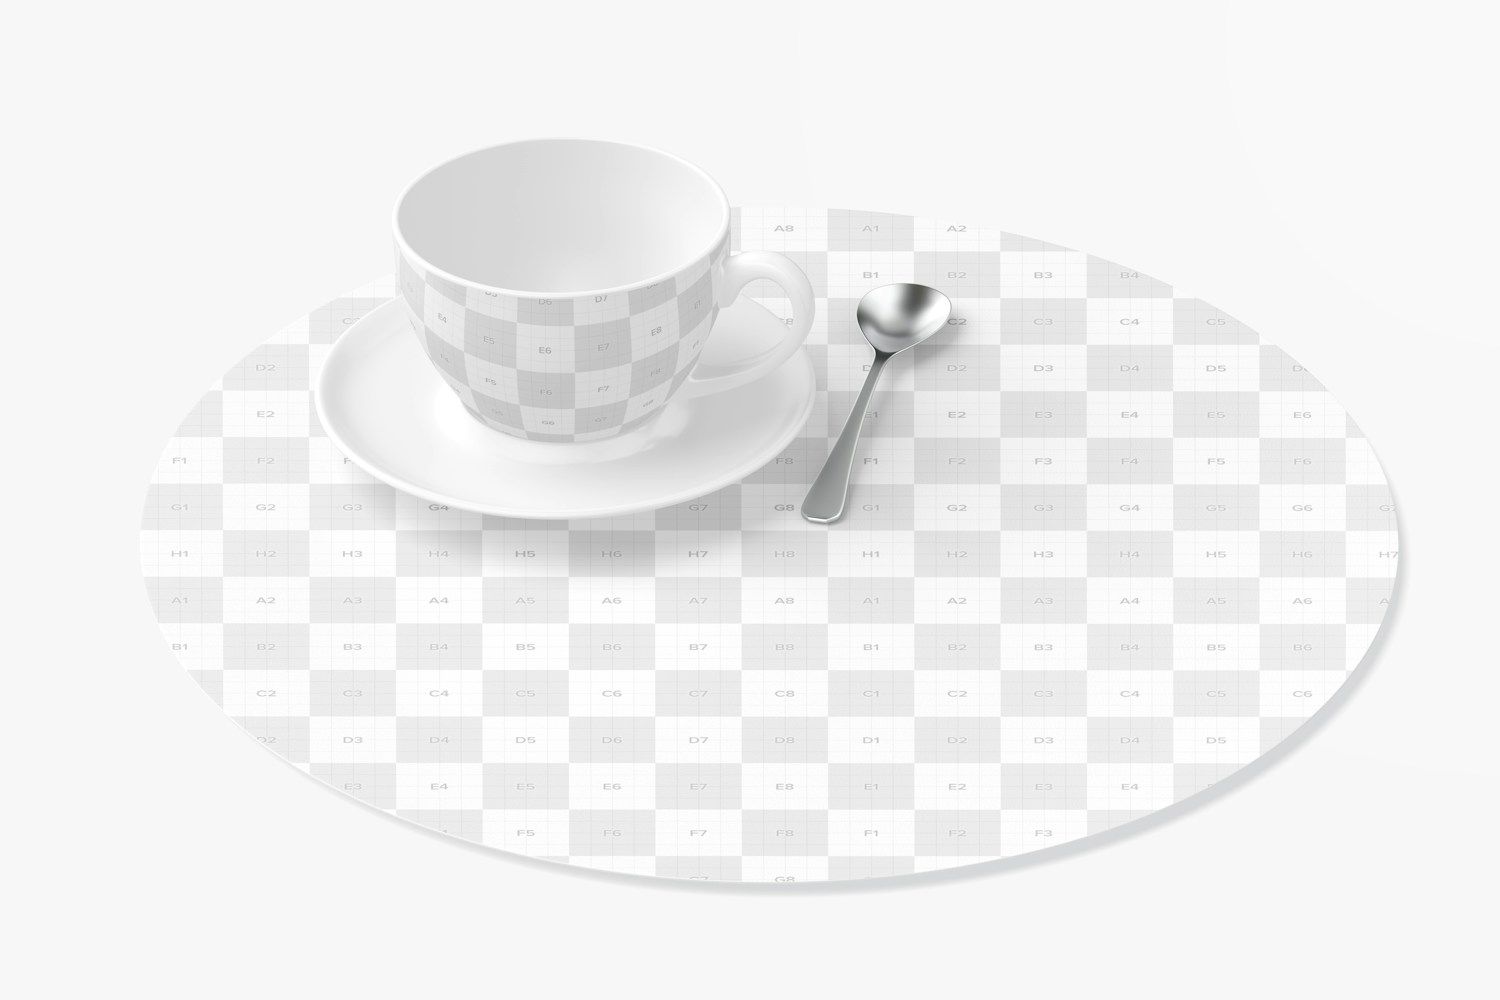 Round Placemats with Cup Mockup